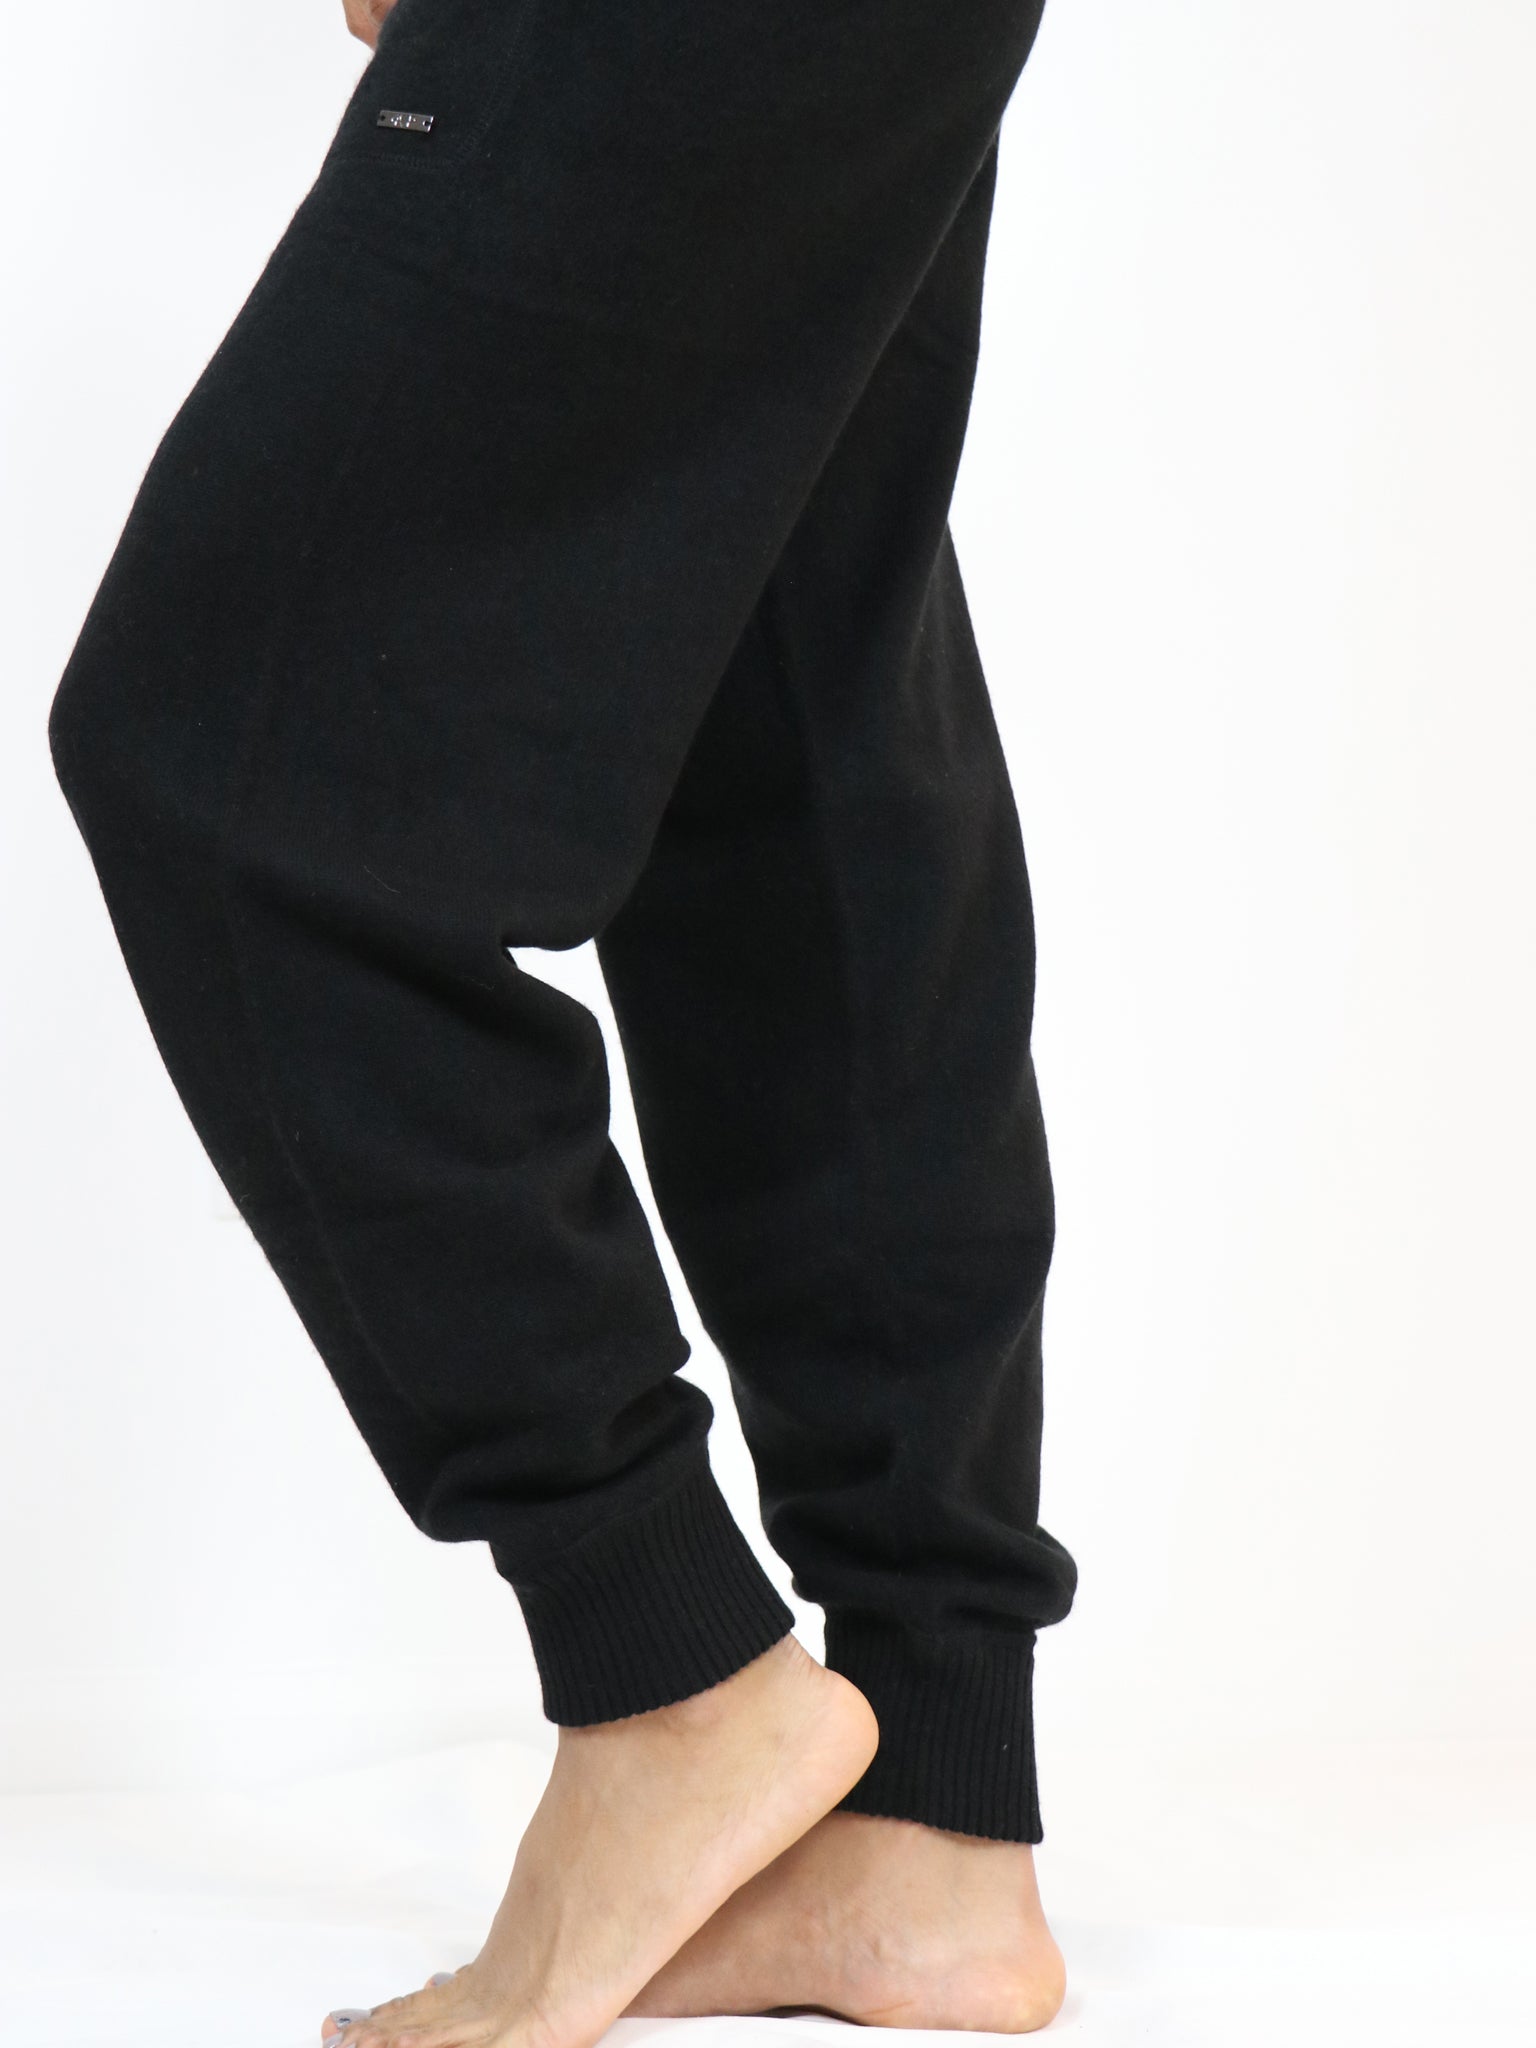 Cashmere Sweatpants with Intarsia at waistband